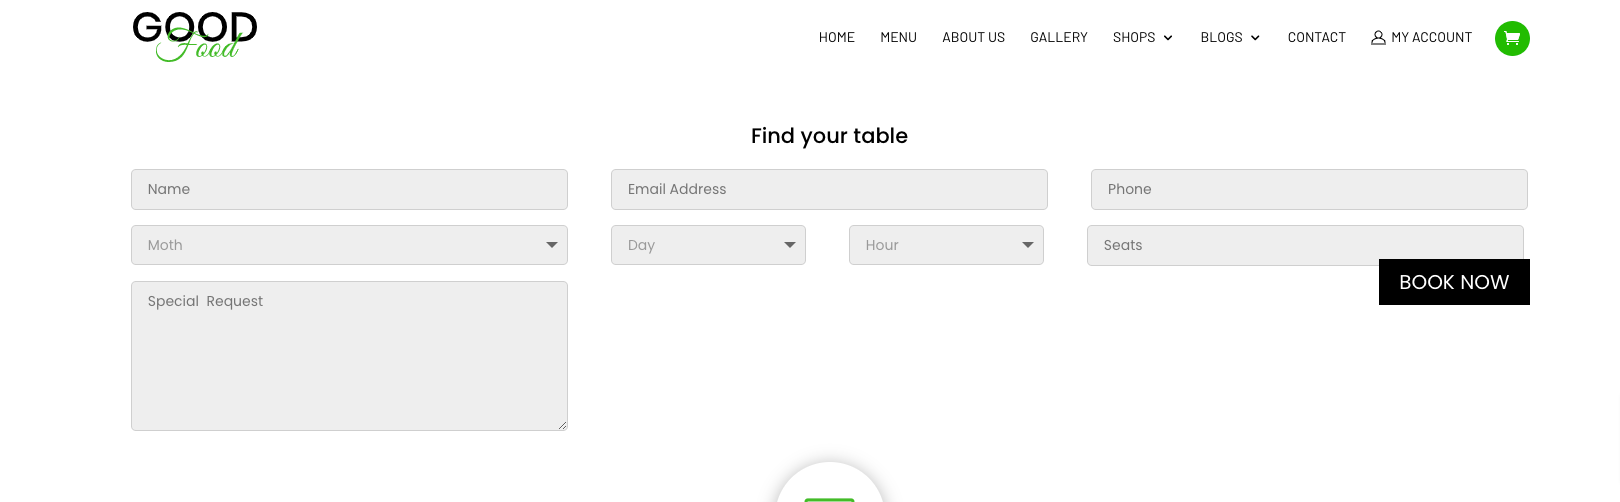 Find a Table Form My CMS